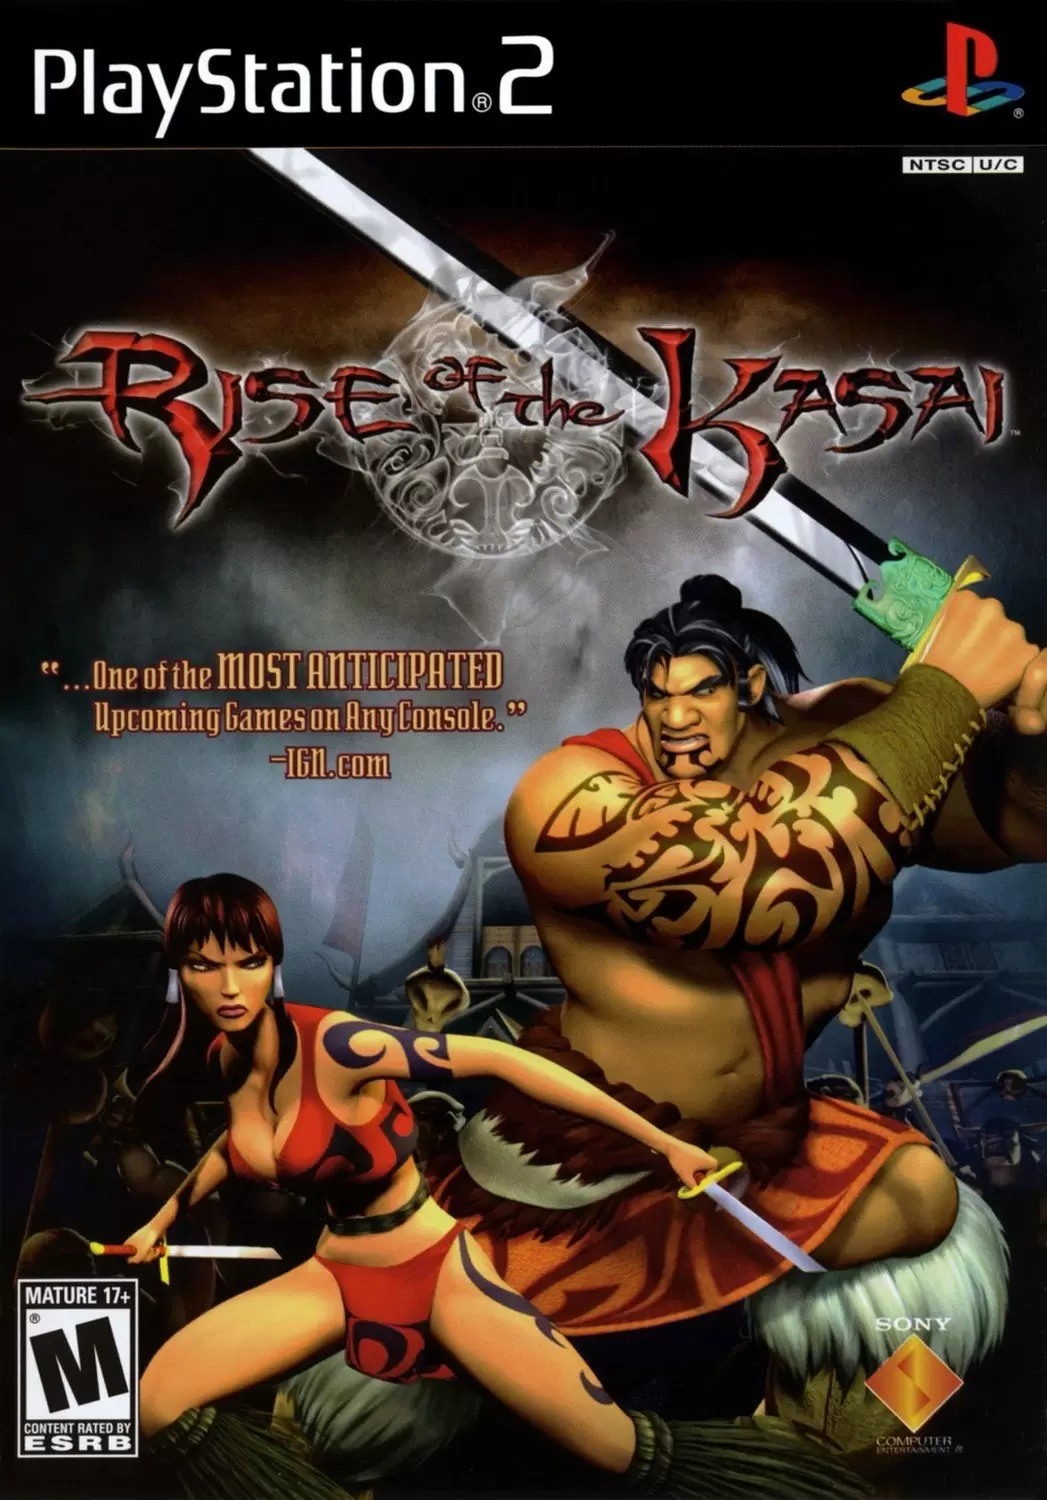 PS2 Games - Rise Of The Kasai